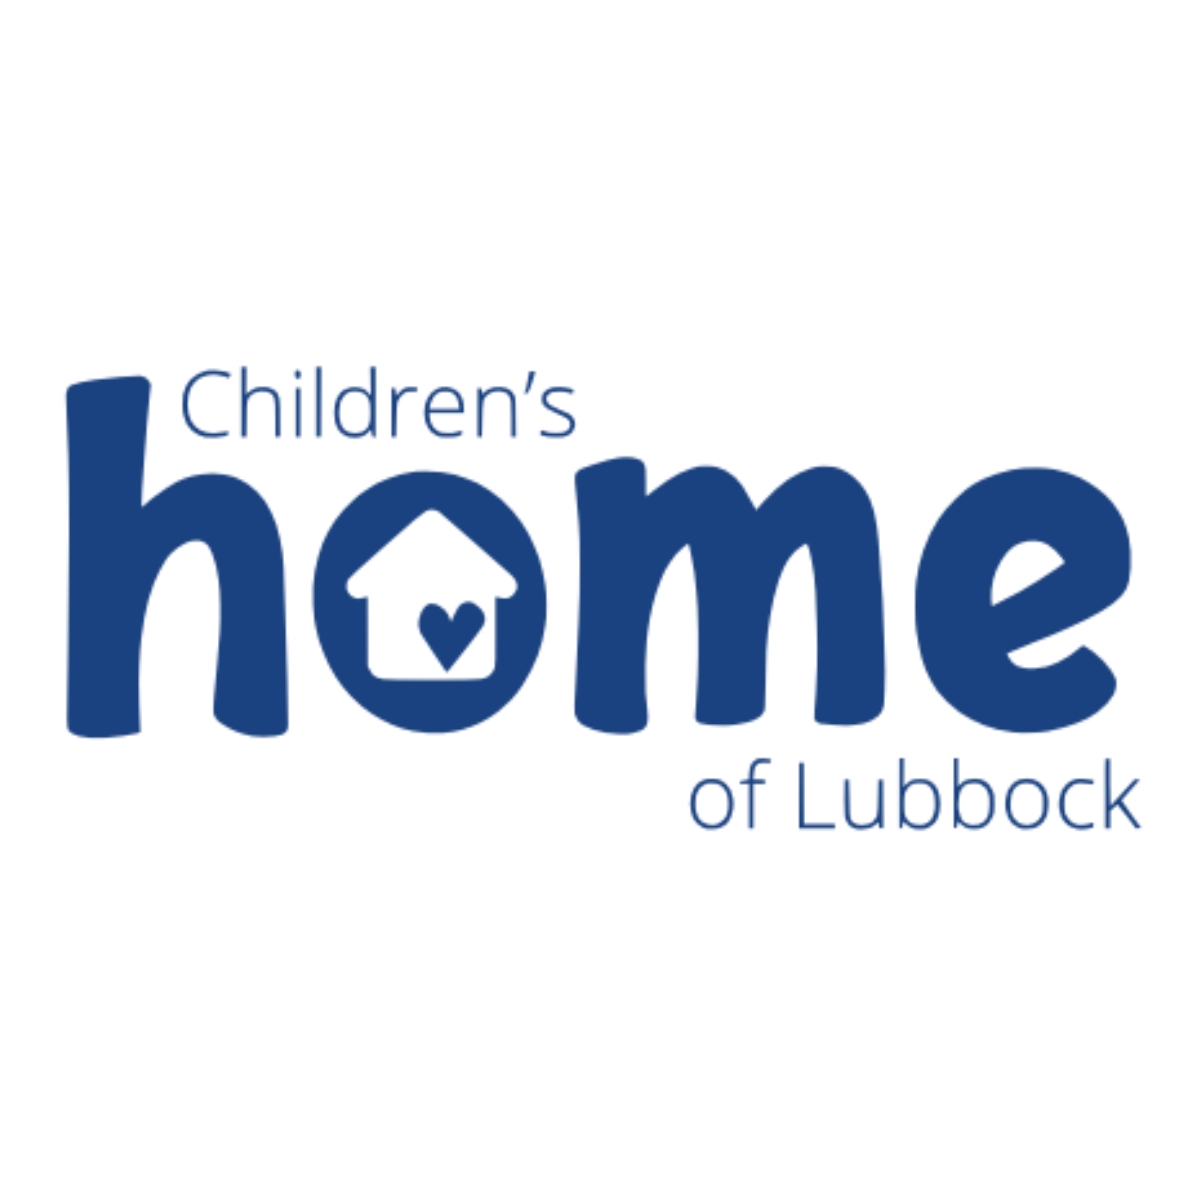 Childrens Home of Lubbock